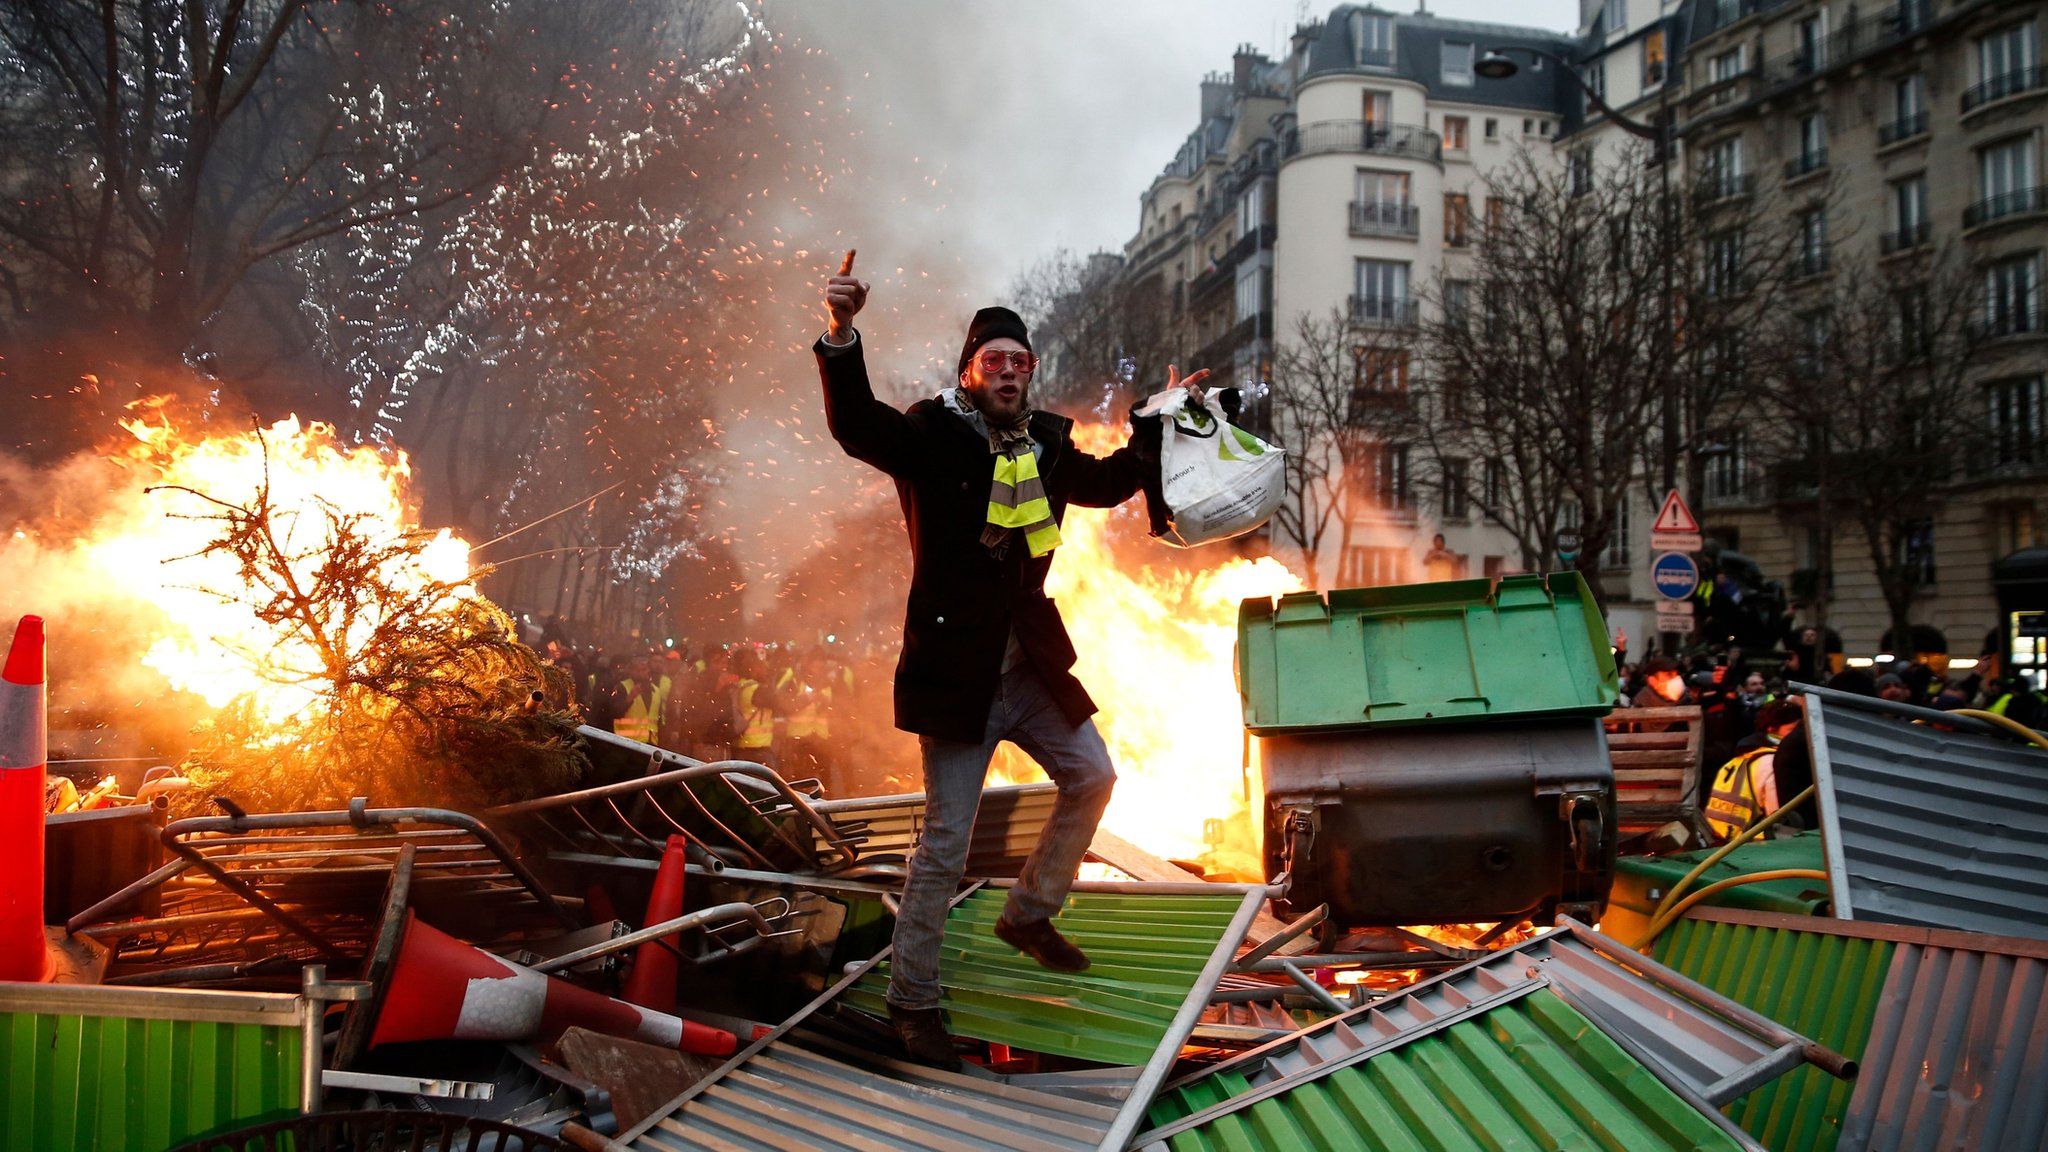 Demonstrator on a barricade in Paris on 5 January 2019